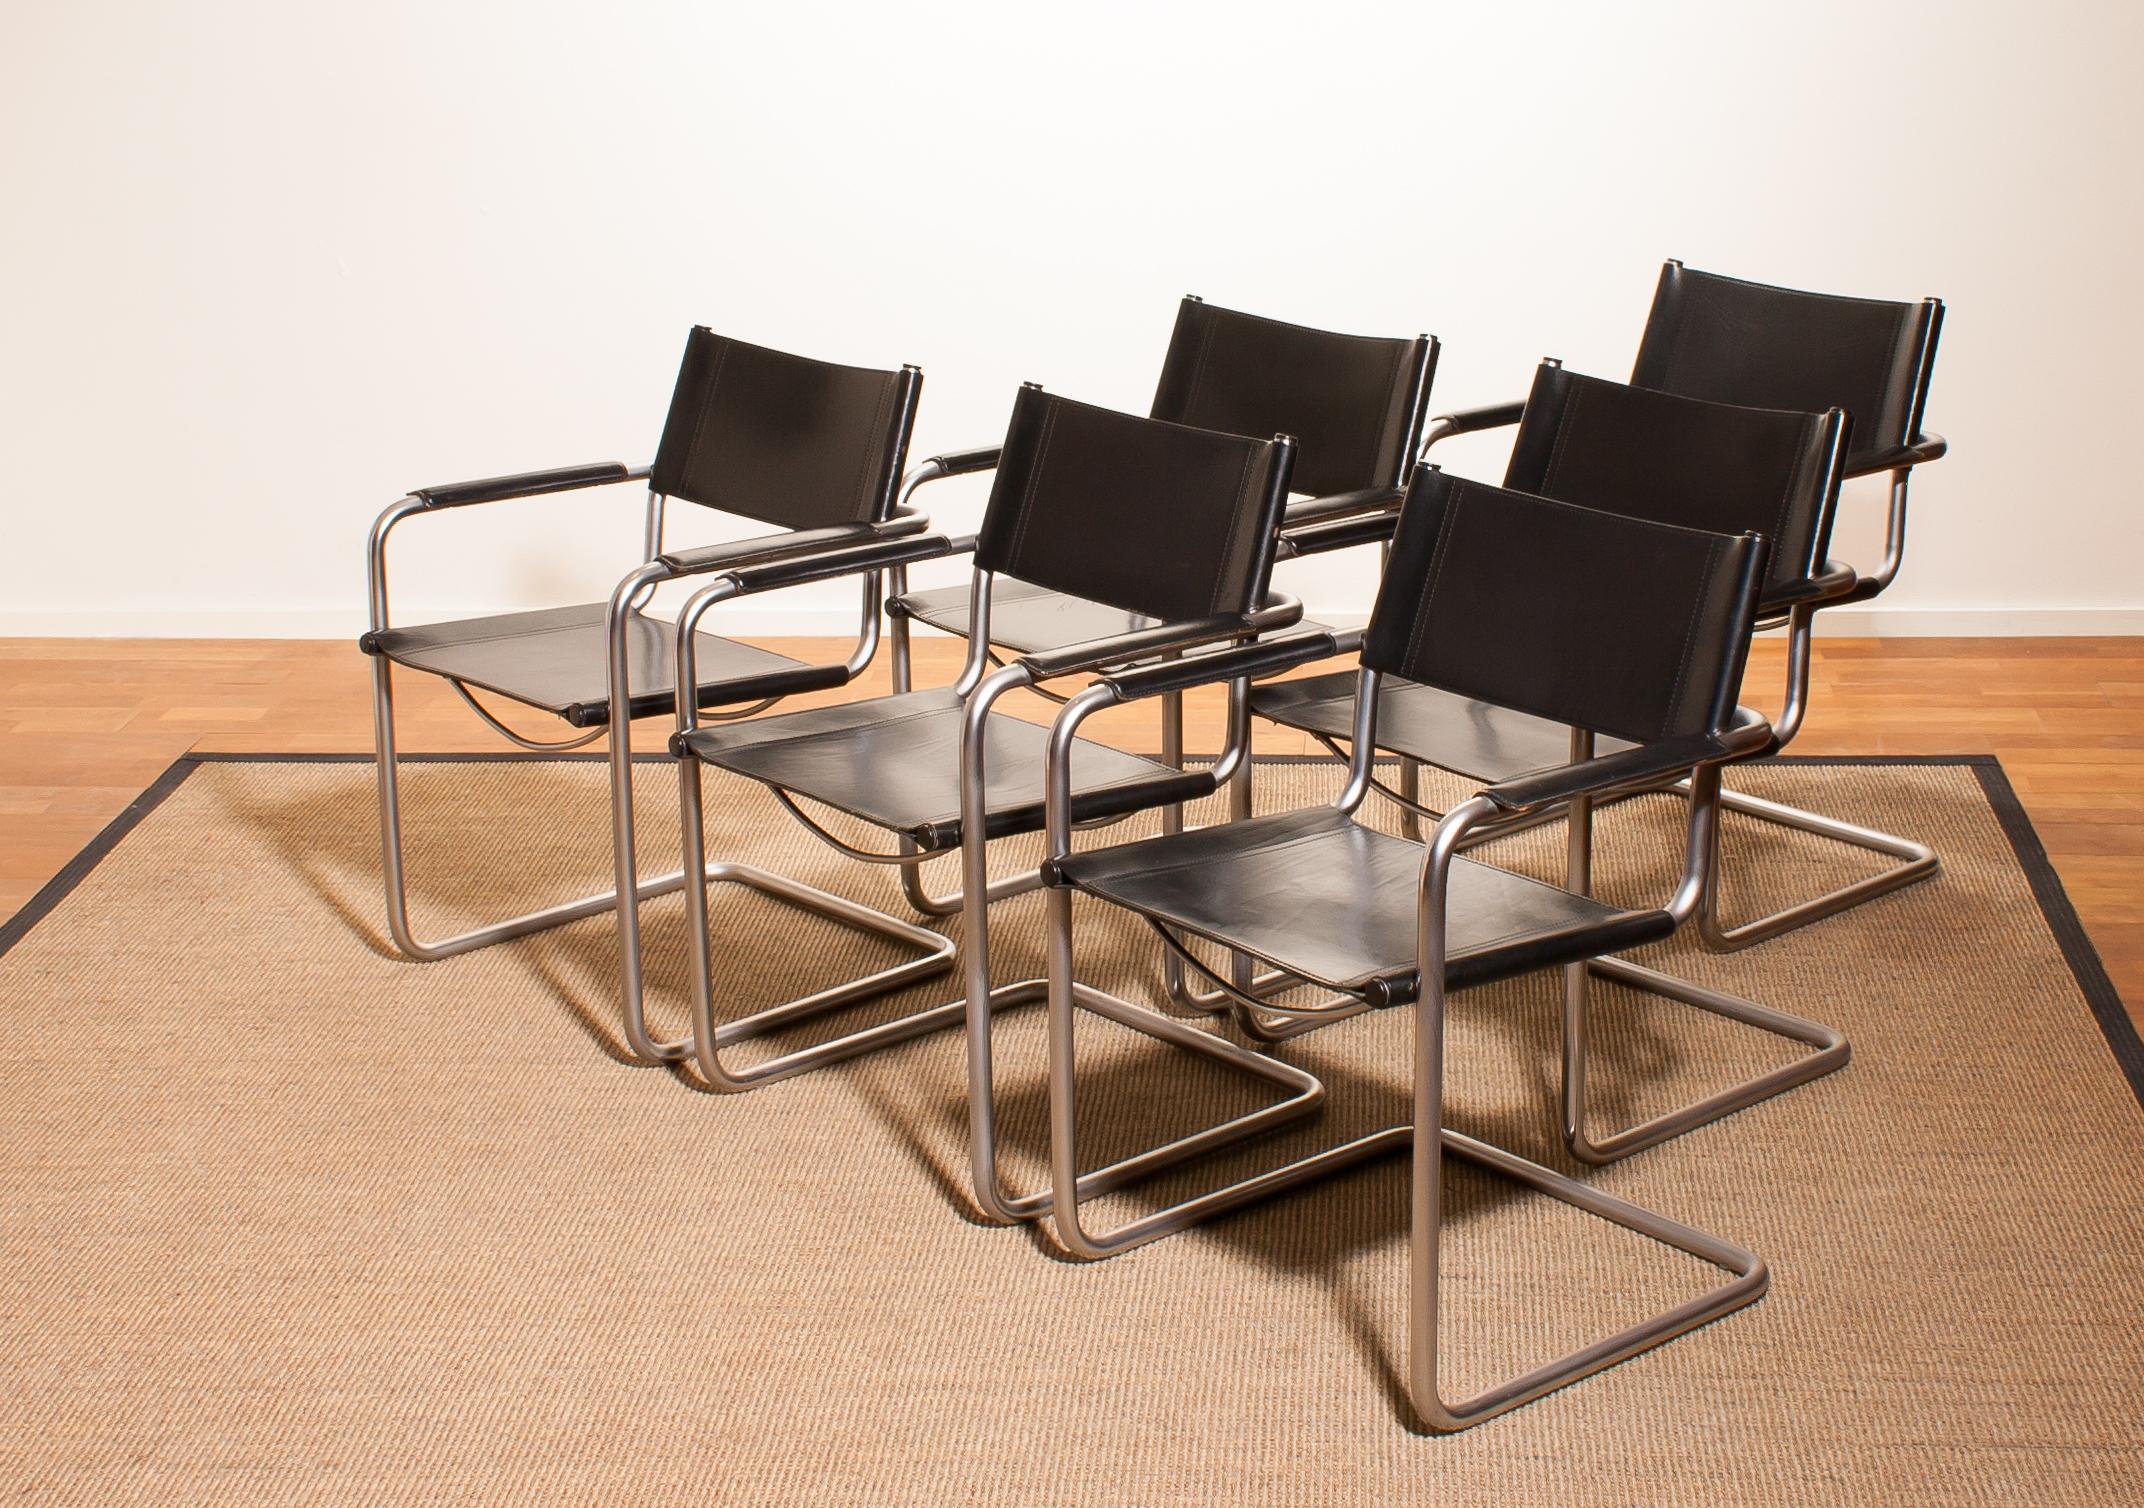 A beautiful set of six dining chairs made by Matteo Grassi, Italy.
The chairs have tubular titanium look steel frames with sturdy black leather seating and backrest.
They are signed on the back of the backrest.
The chairs are in a very nice